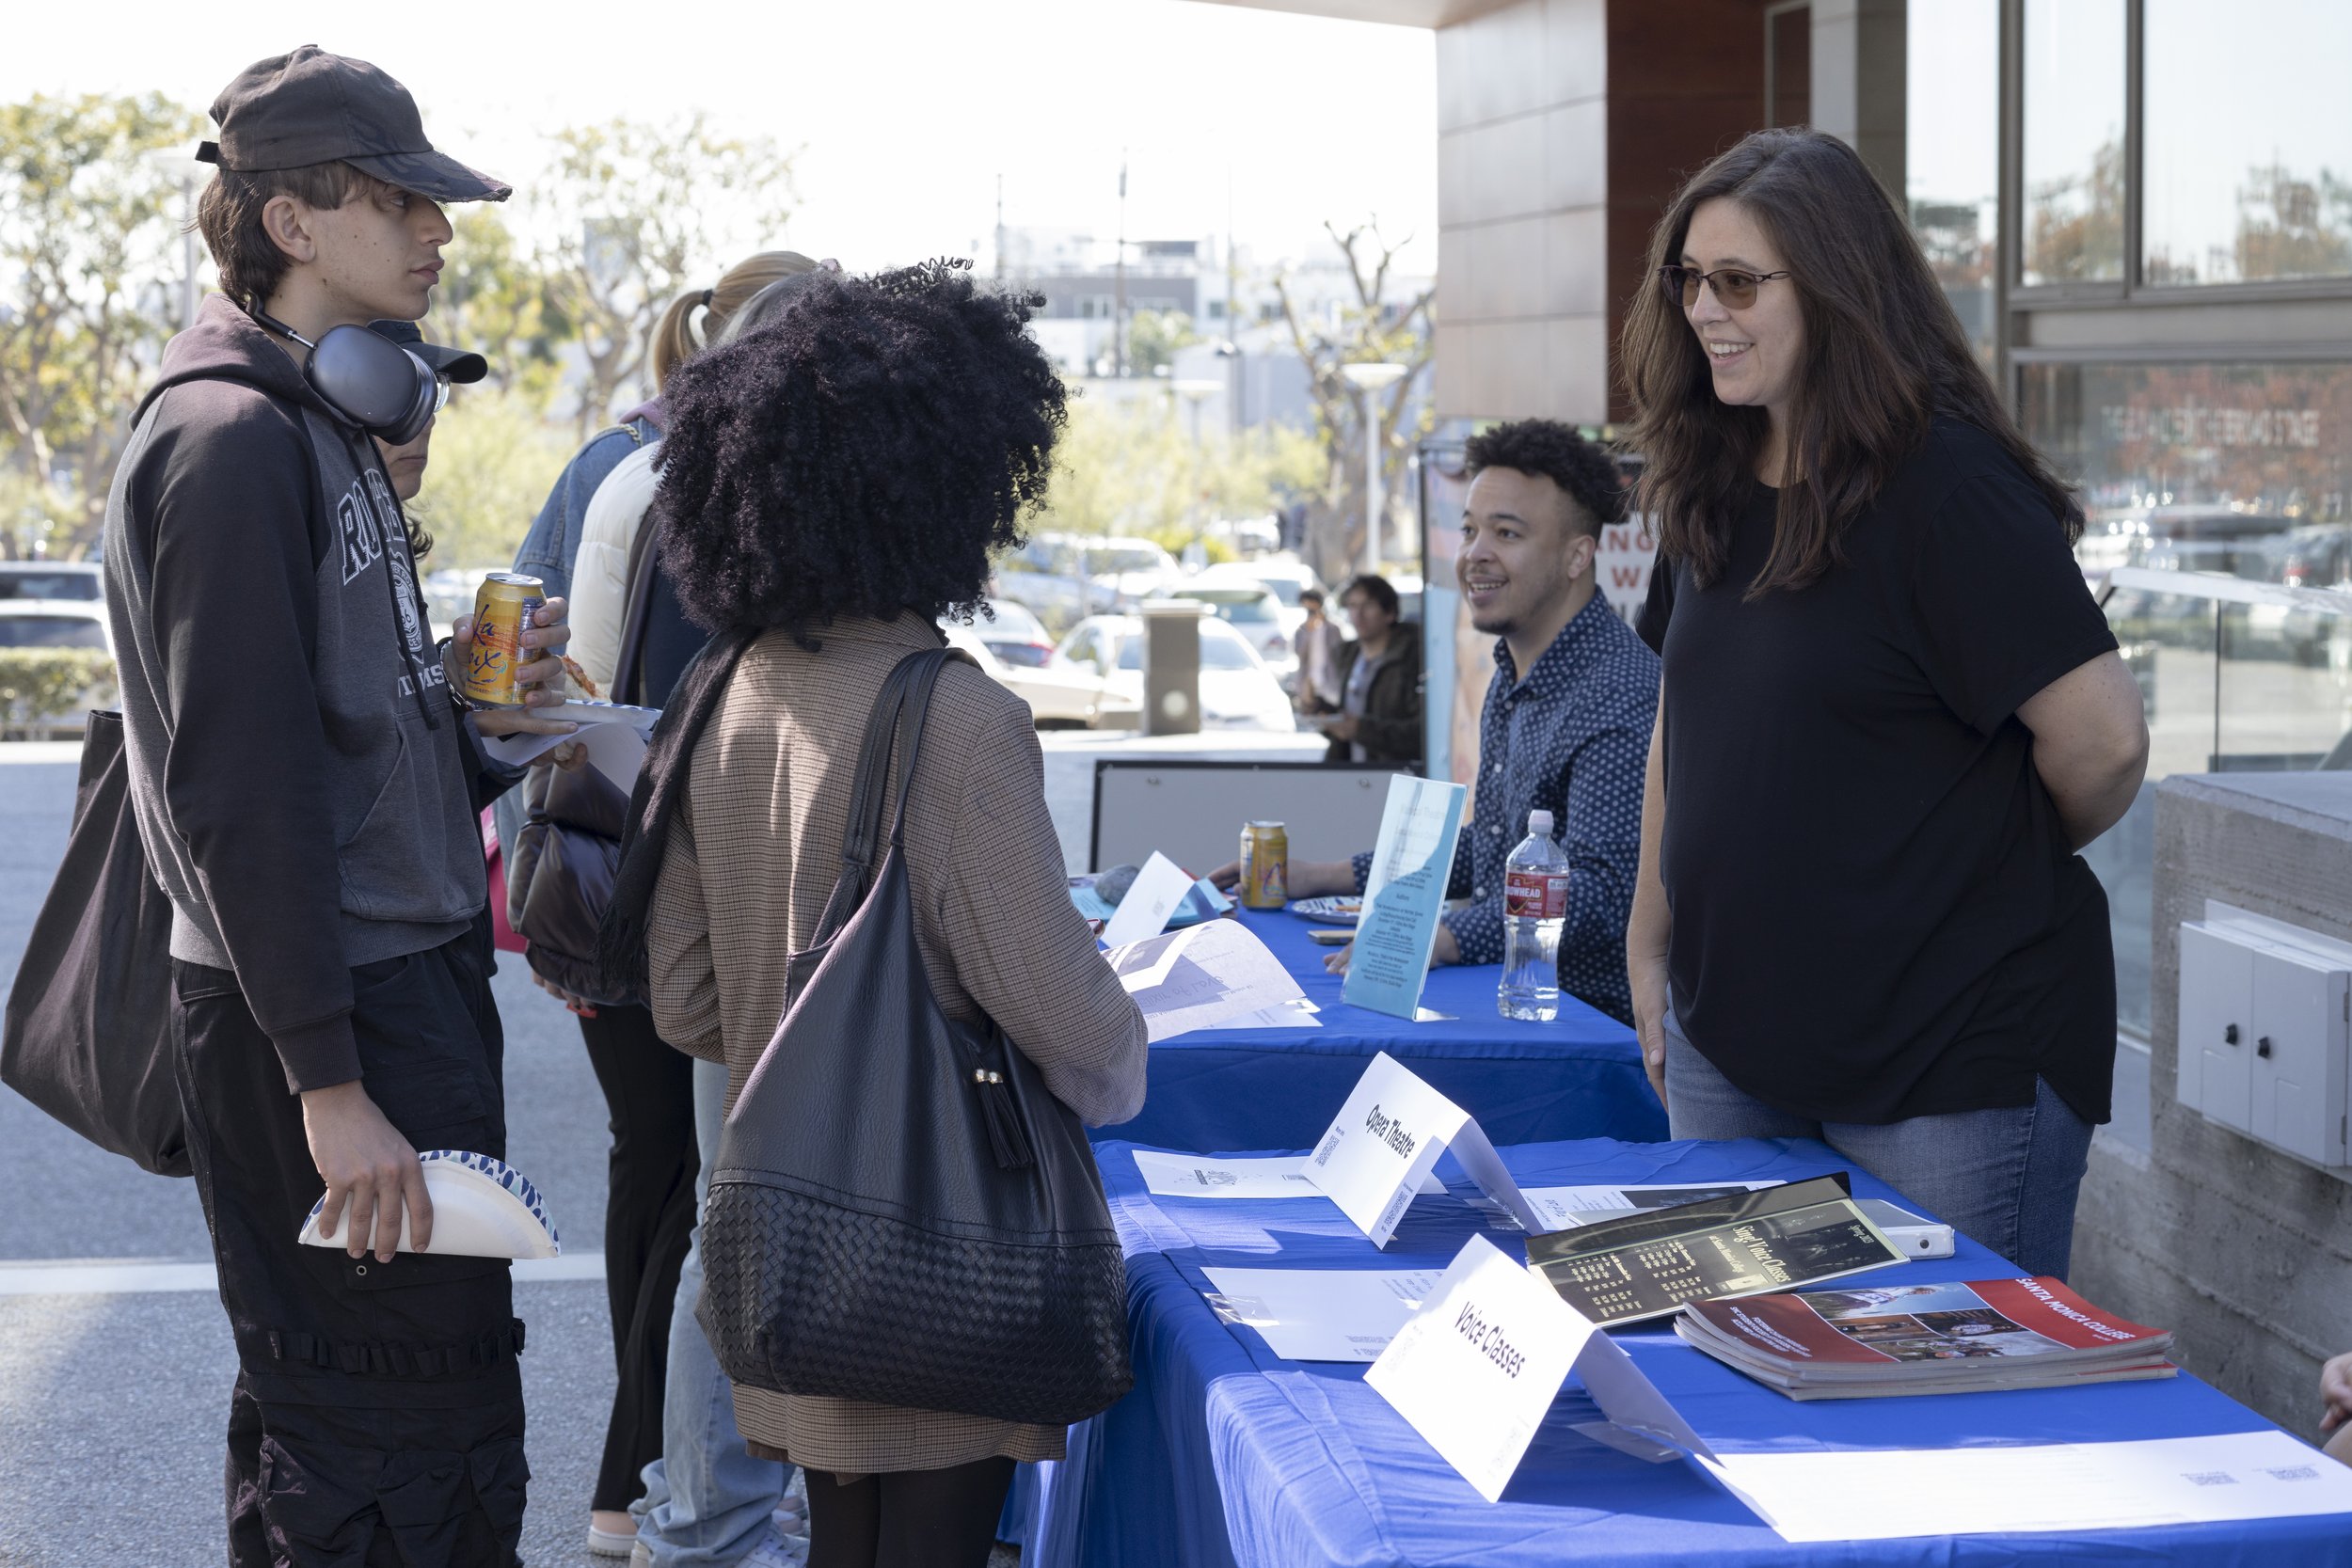  The Music Department at Santa Monica College held an open house at the Performing Arts Center featuring table set-ups from each music class to encourage students to sign up for classes. November 15, 2022, Santa Monica, Calif. (Jamie Addison | The Co